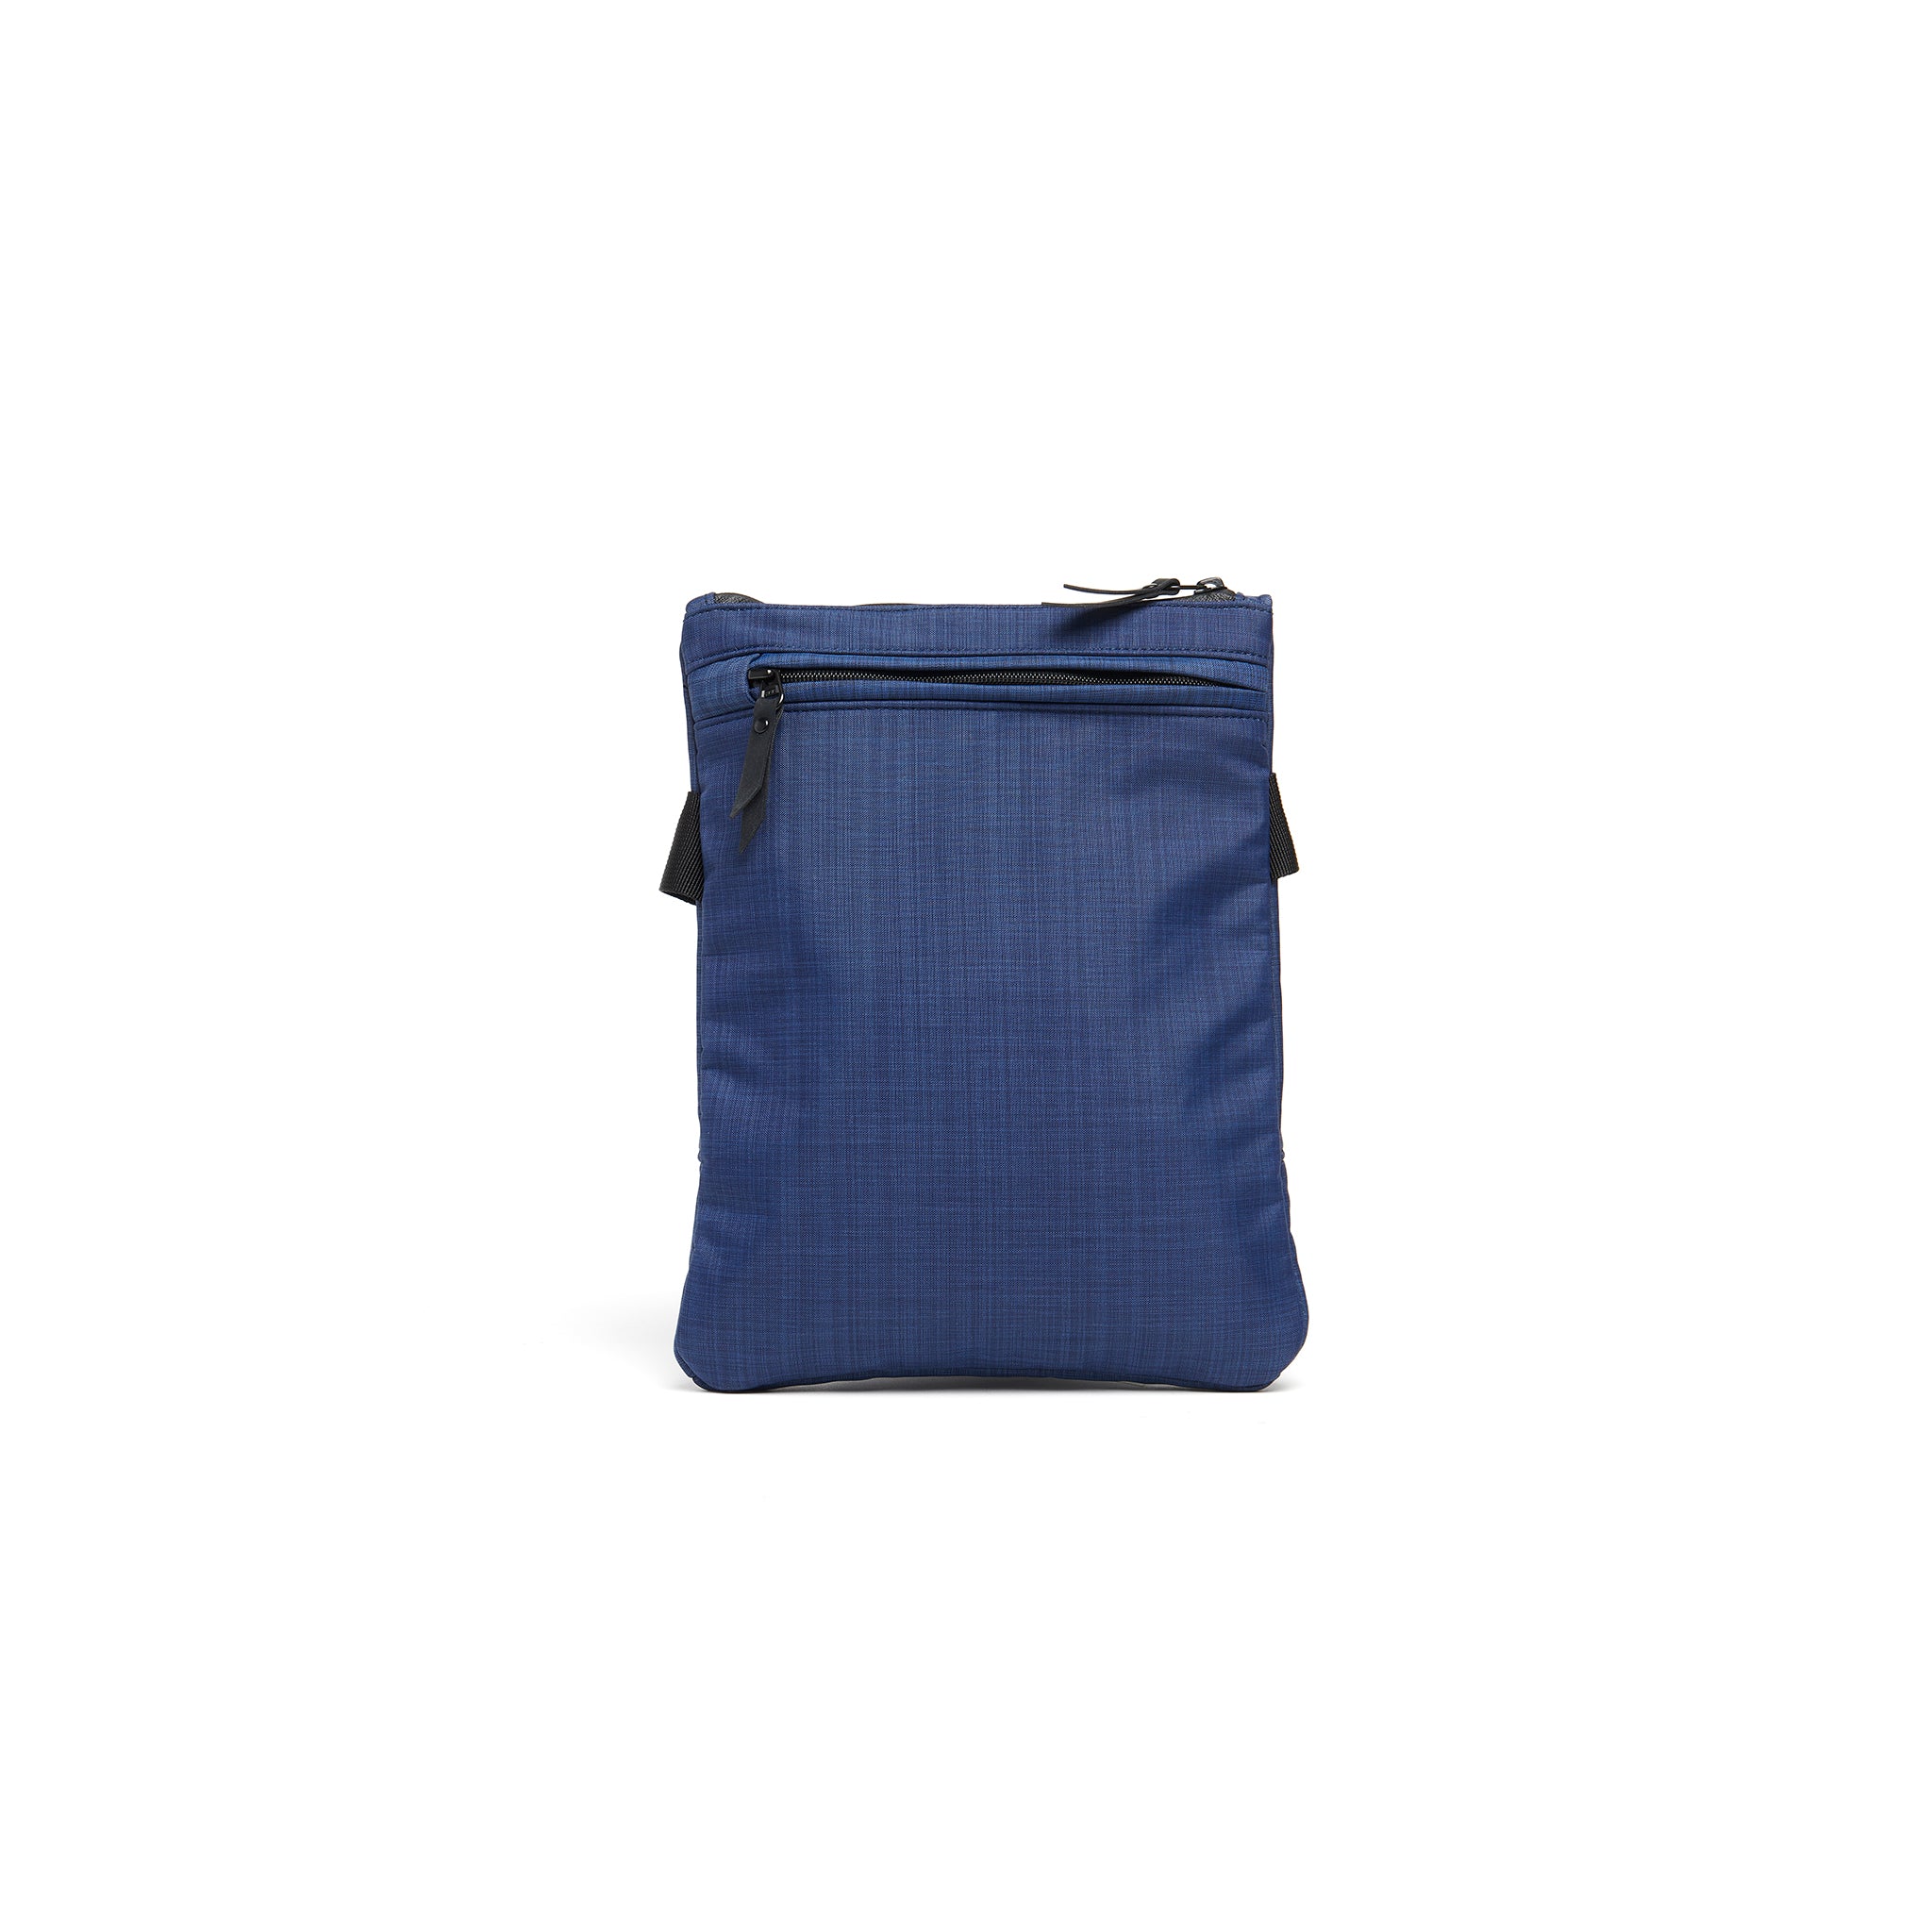 Mueslii crossbody,  made of water resistant canvas nylon, color ocean blue, back view.